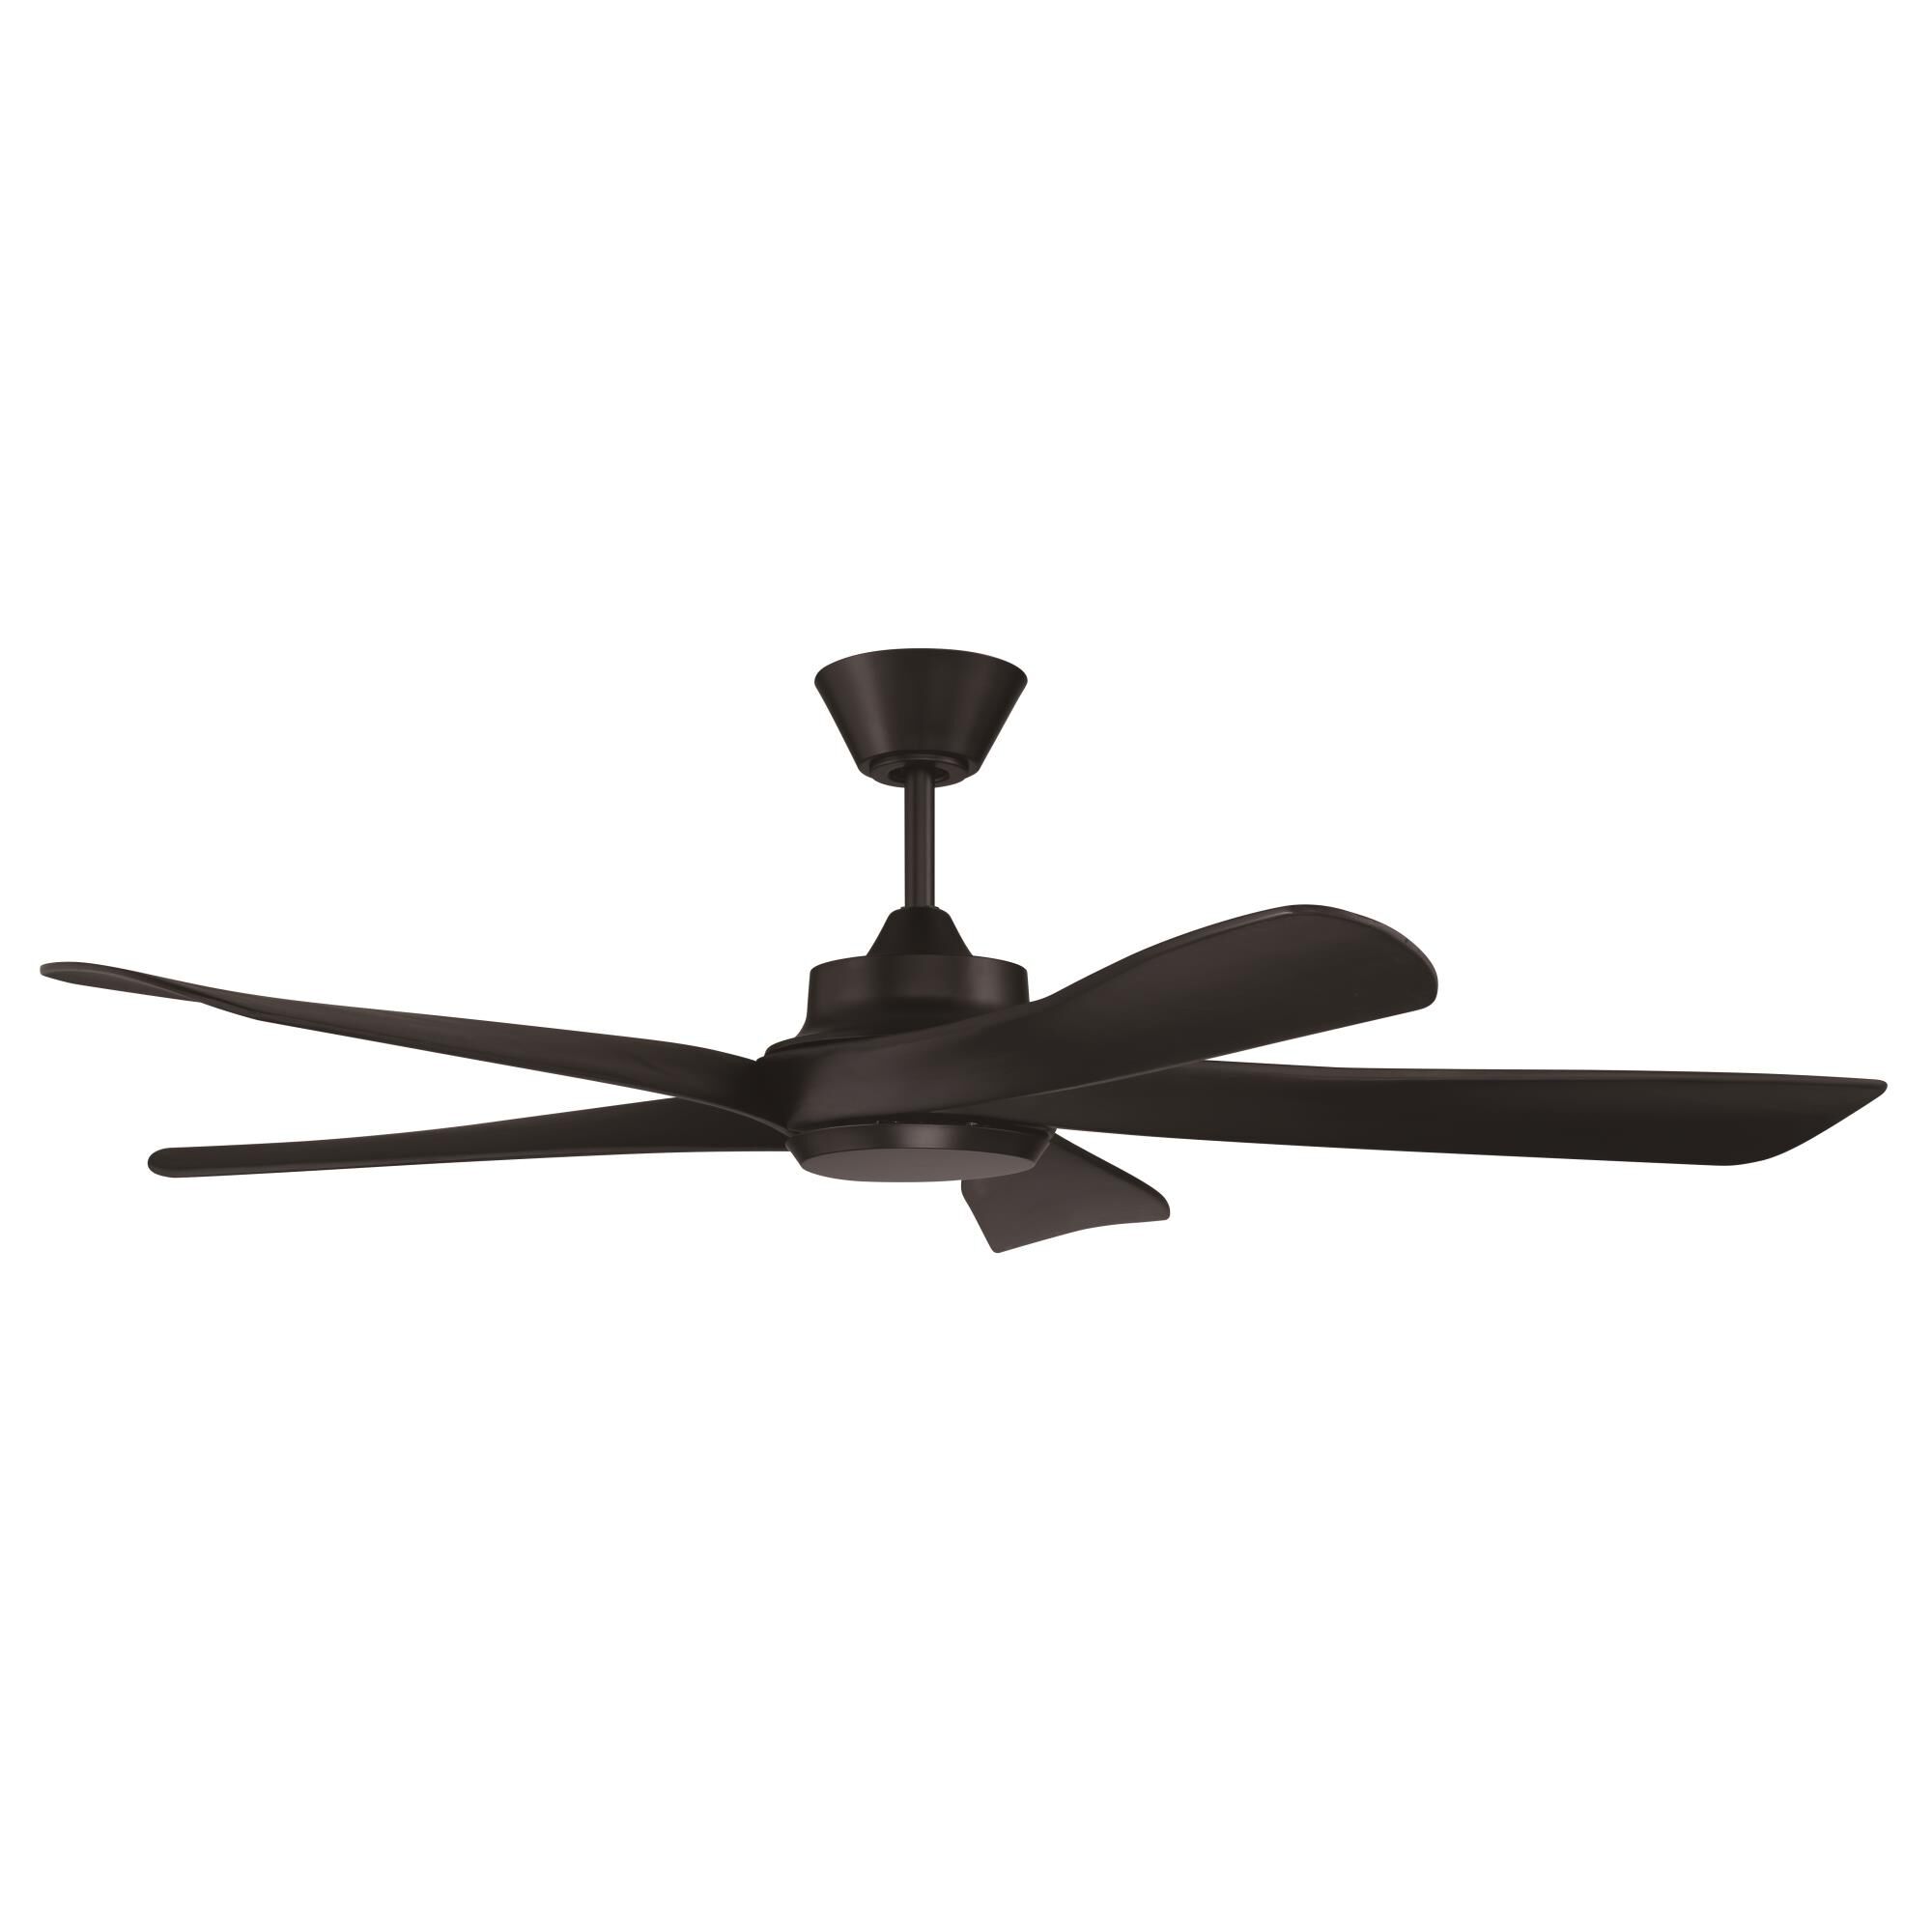 Photos - Fan Craftmade Captivate 52 Inch Ceiling  Captivate - CPT52FB5 - Modern Cont